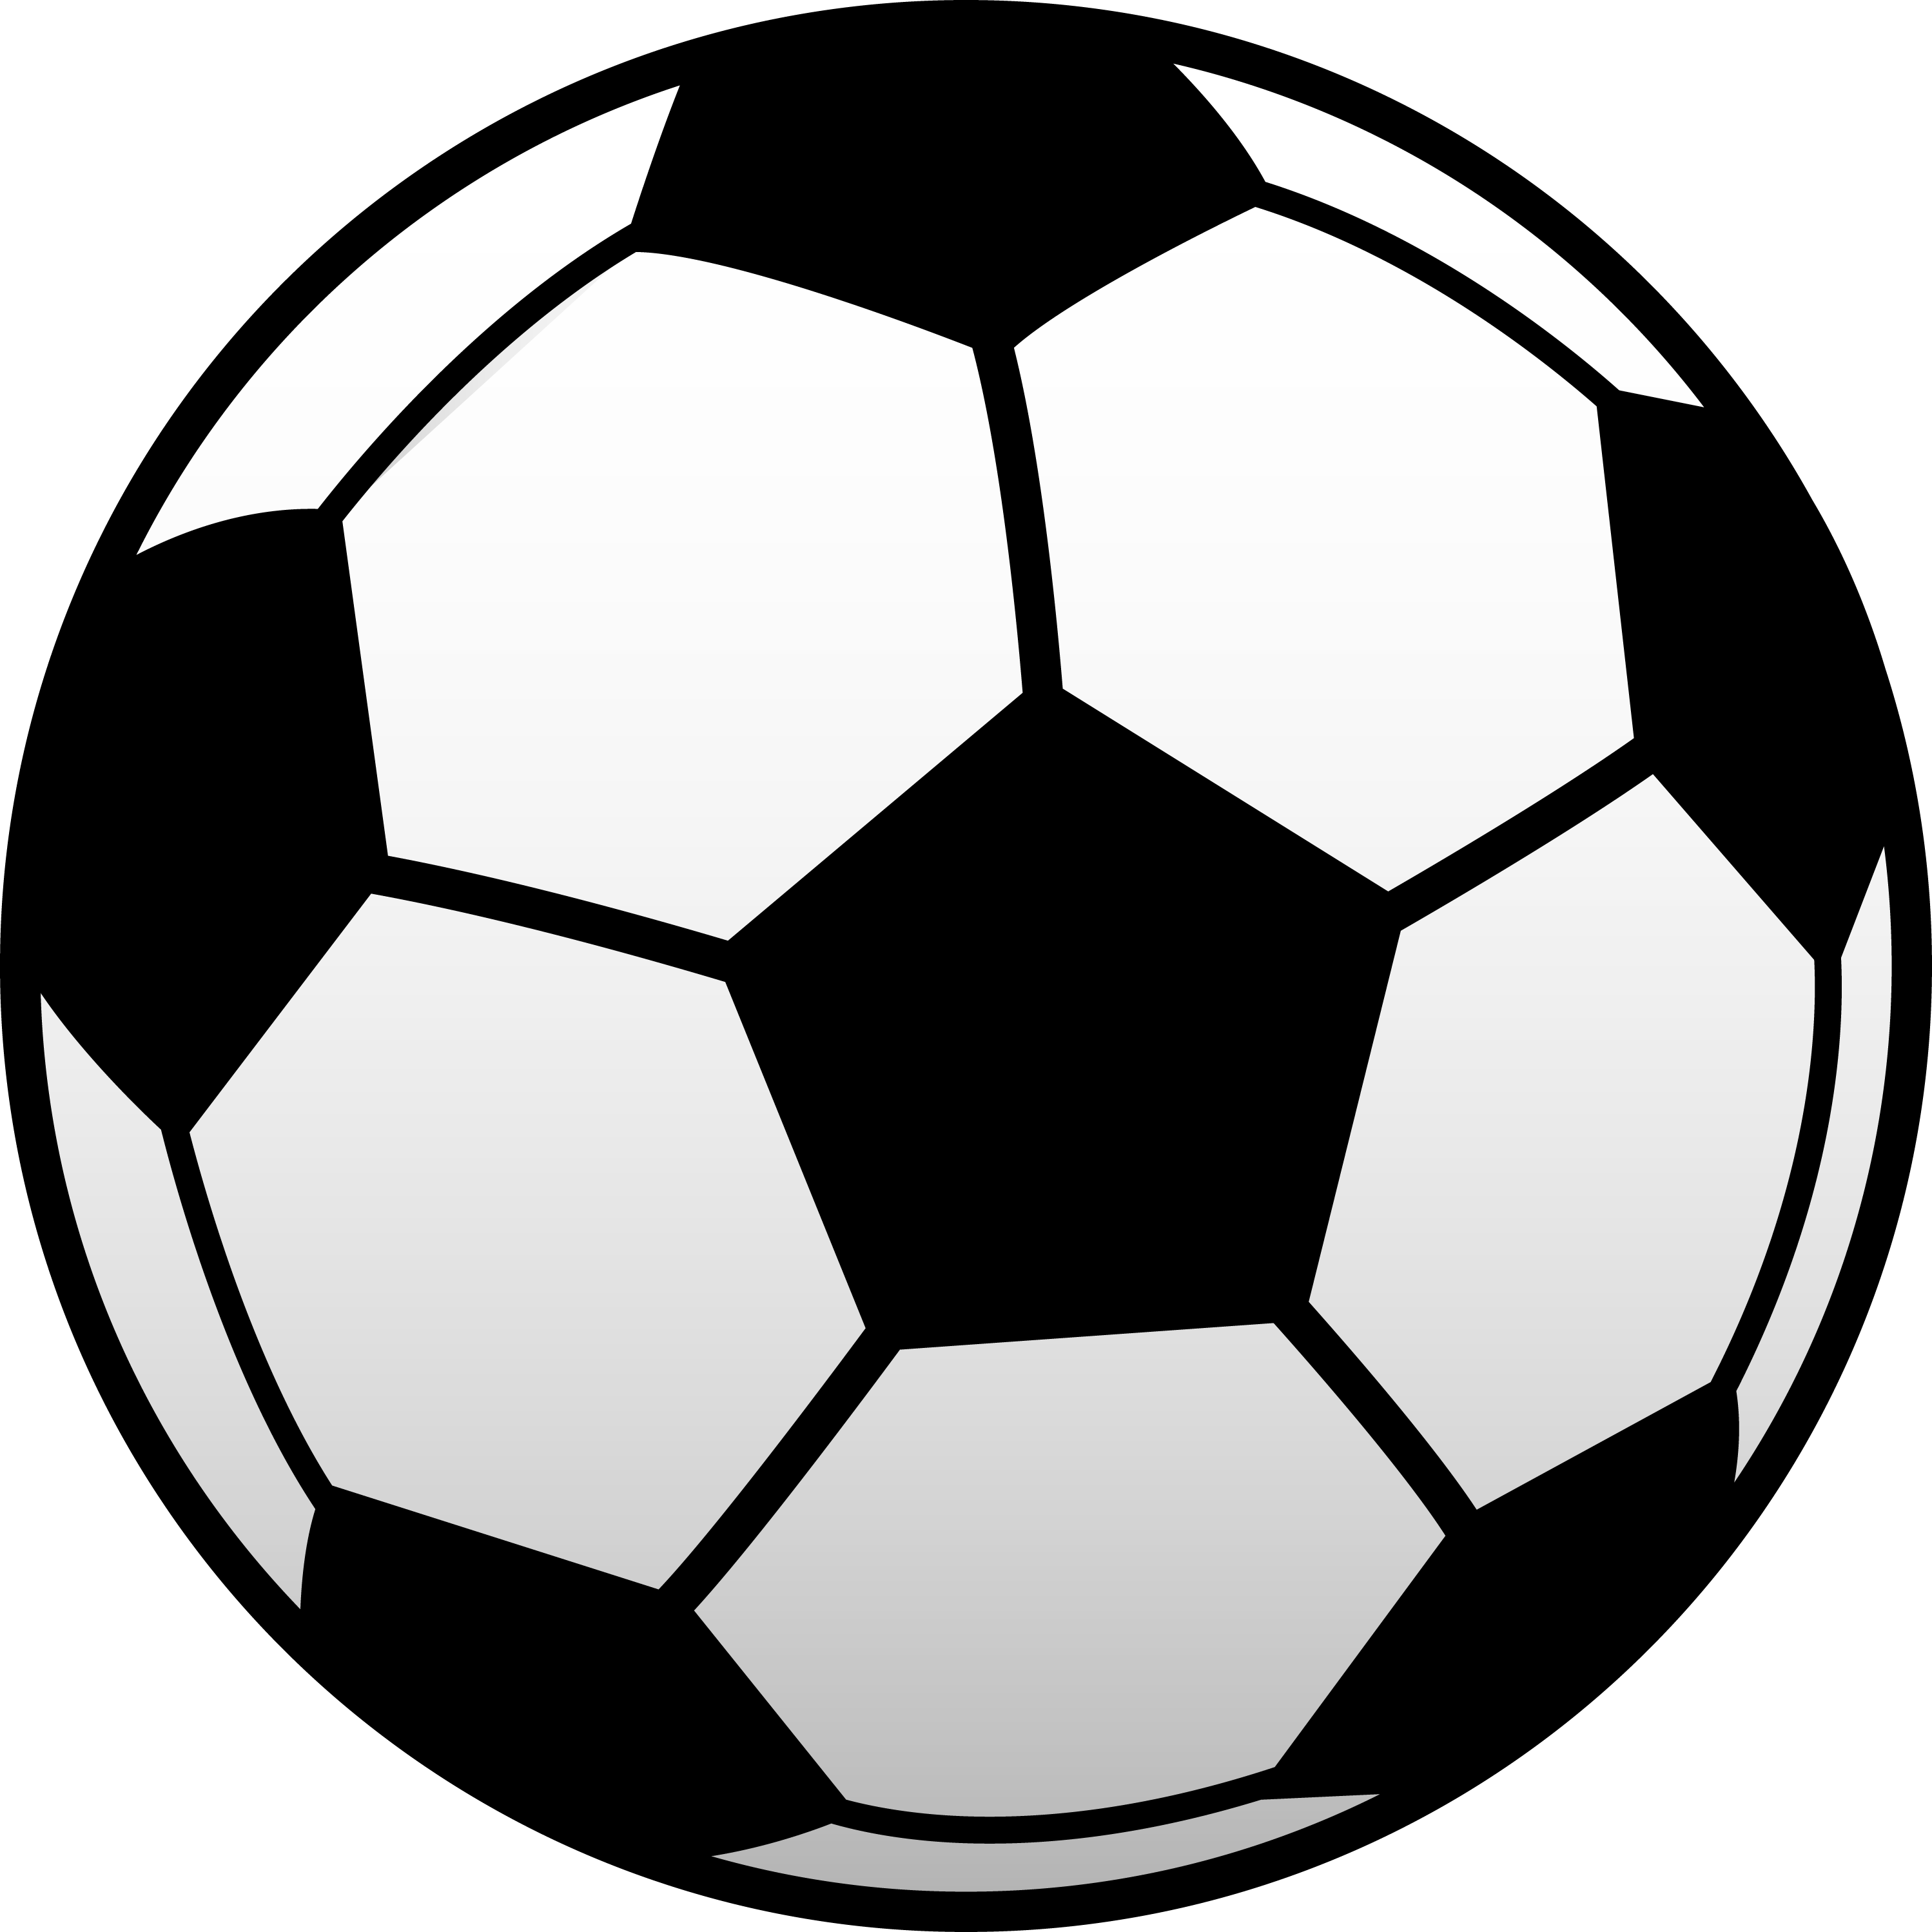 Soccer game clipart free .